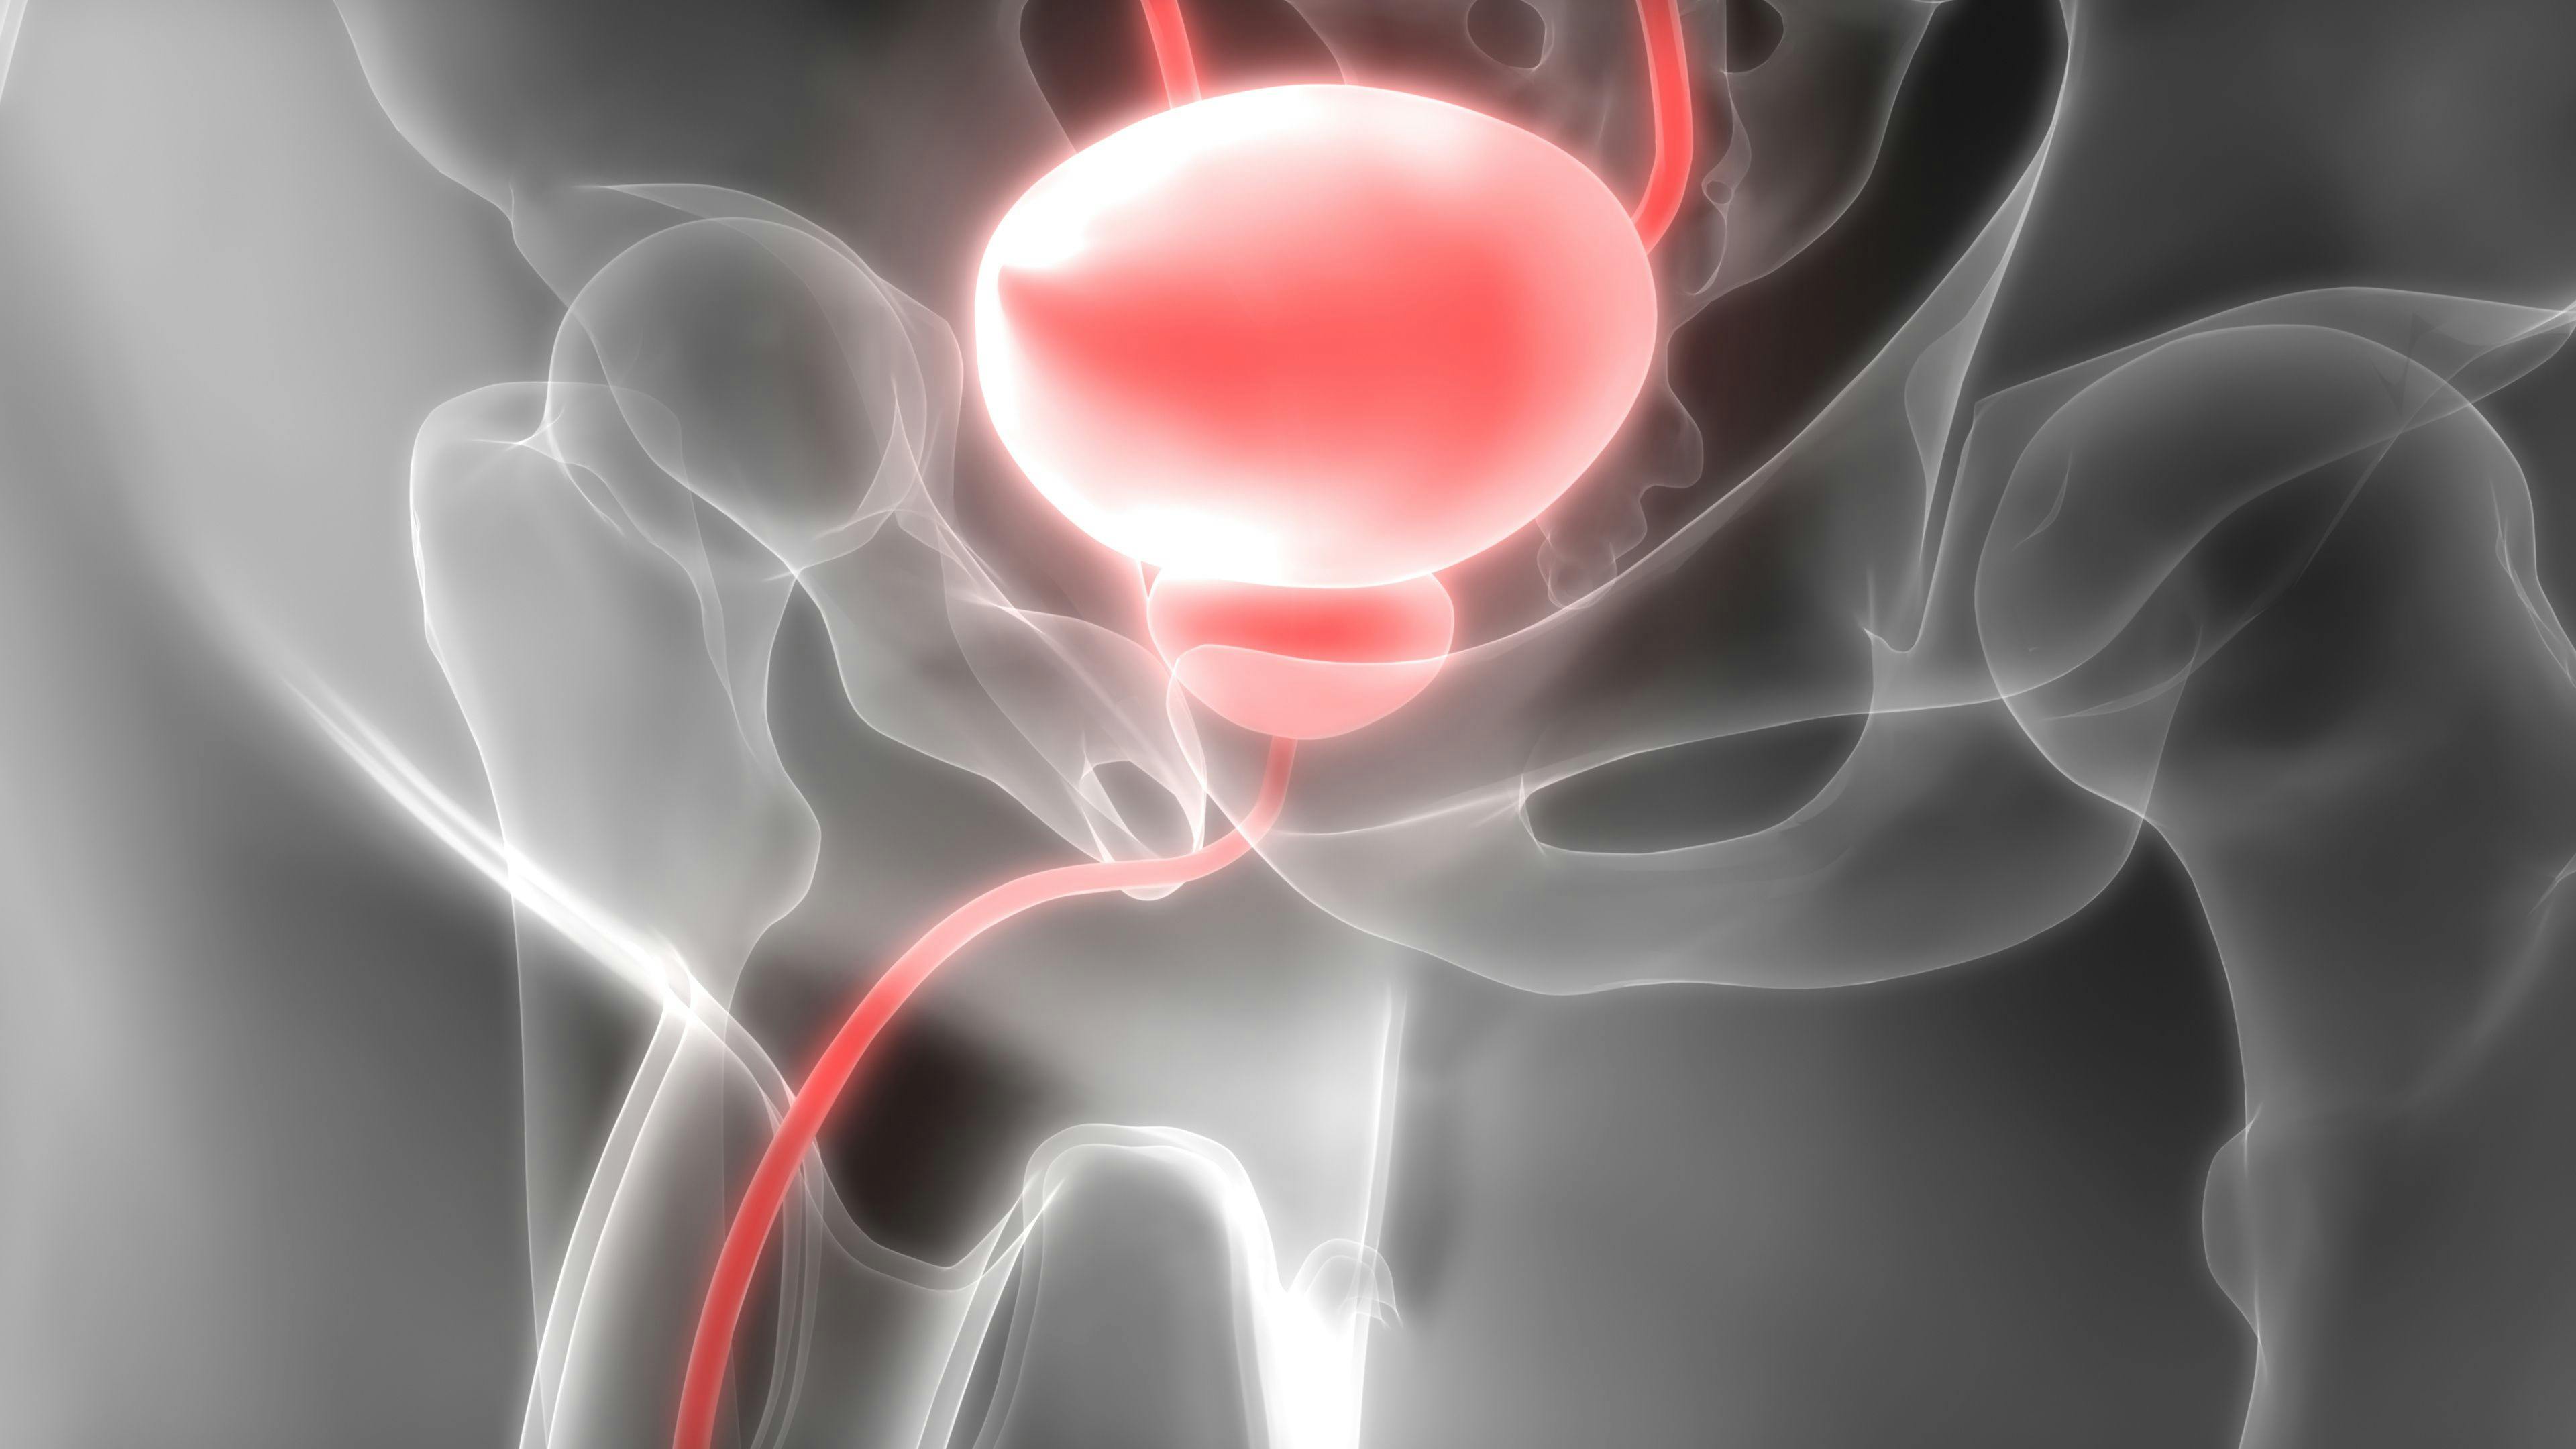 Bladder Cancer Treatment May Negatively Impact Patients’ Psychosocial Well-being